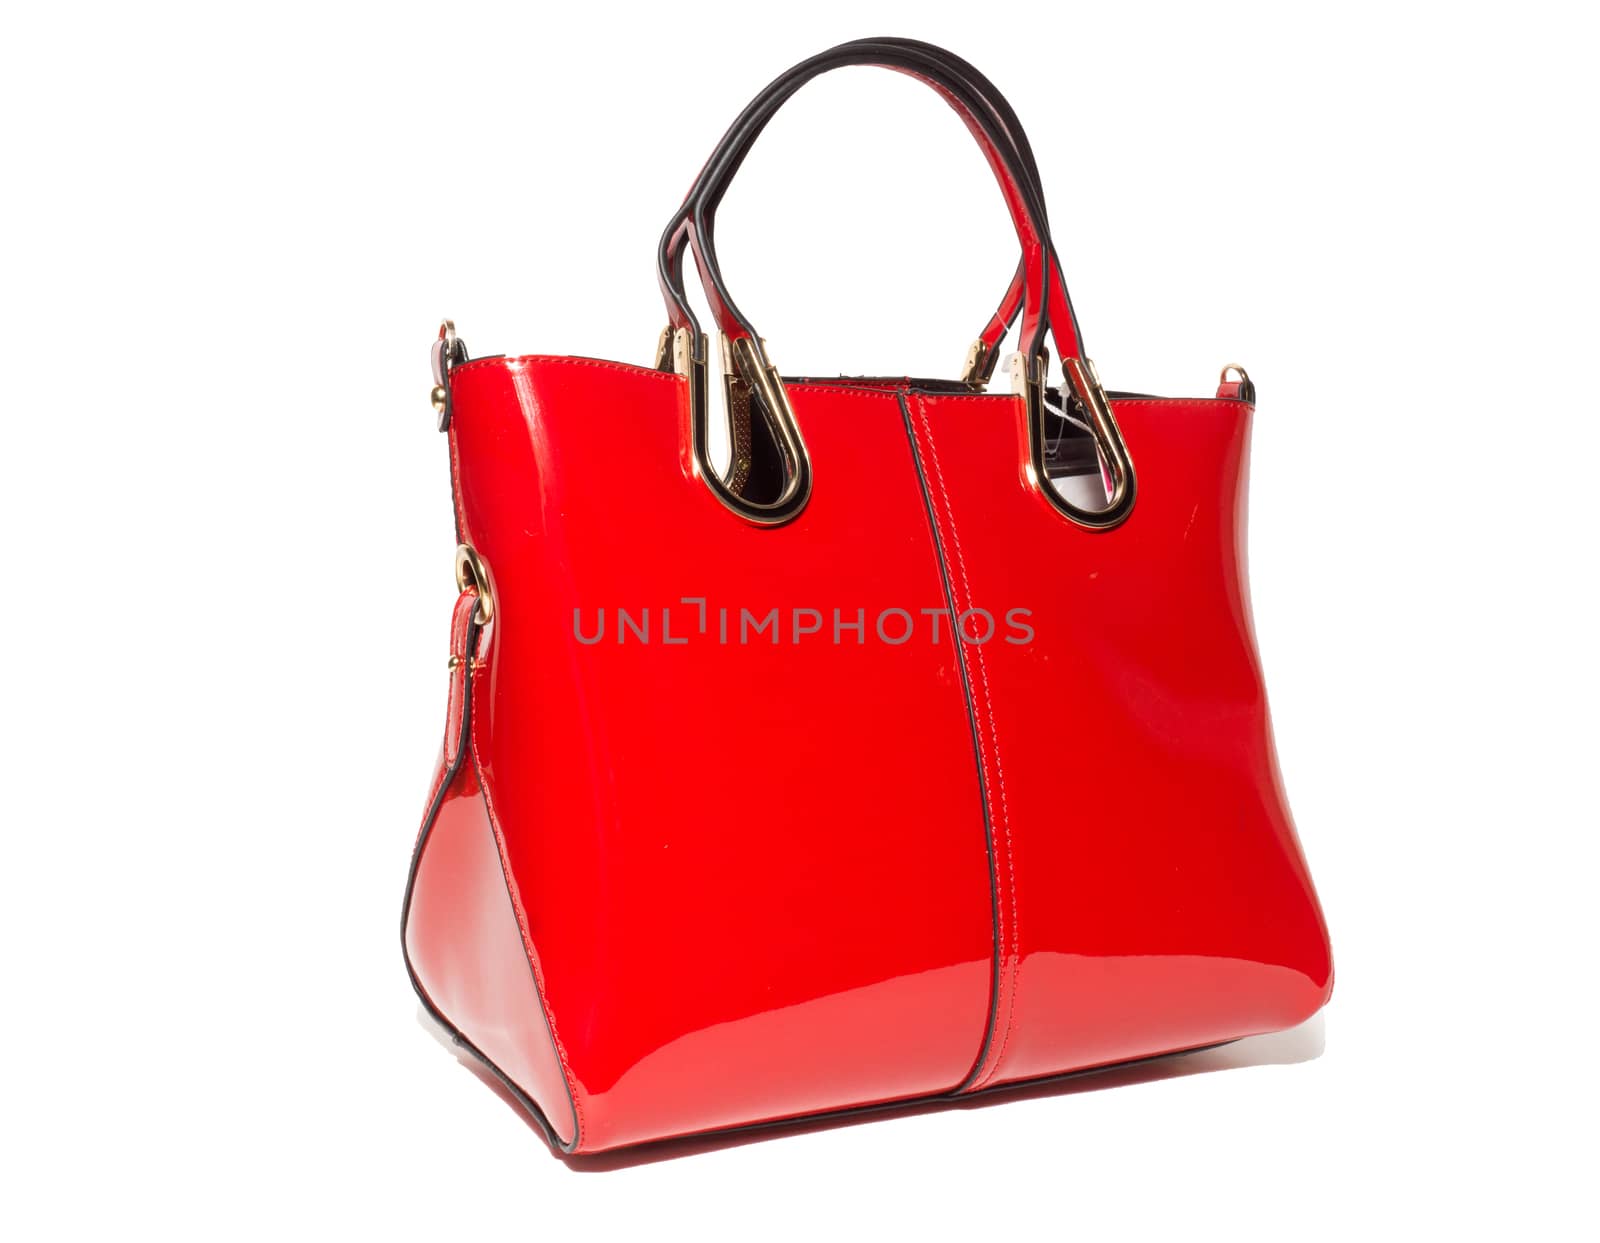 The photograph shows a female handbag on a white background